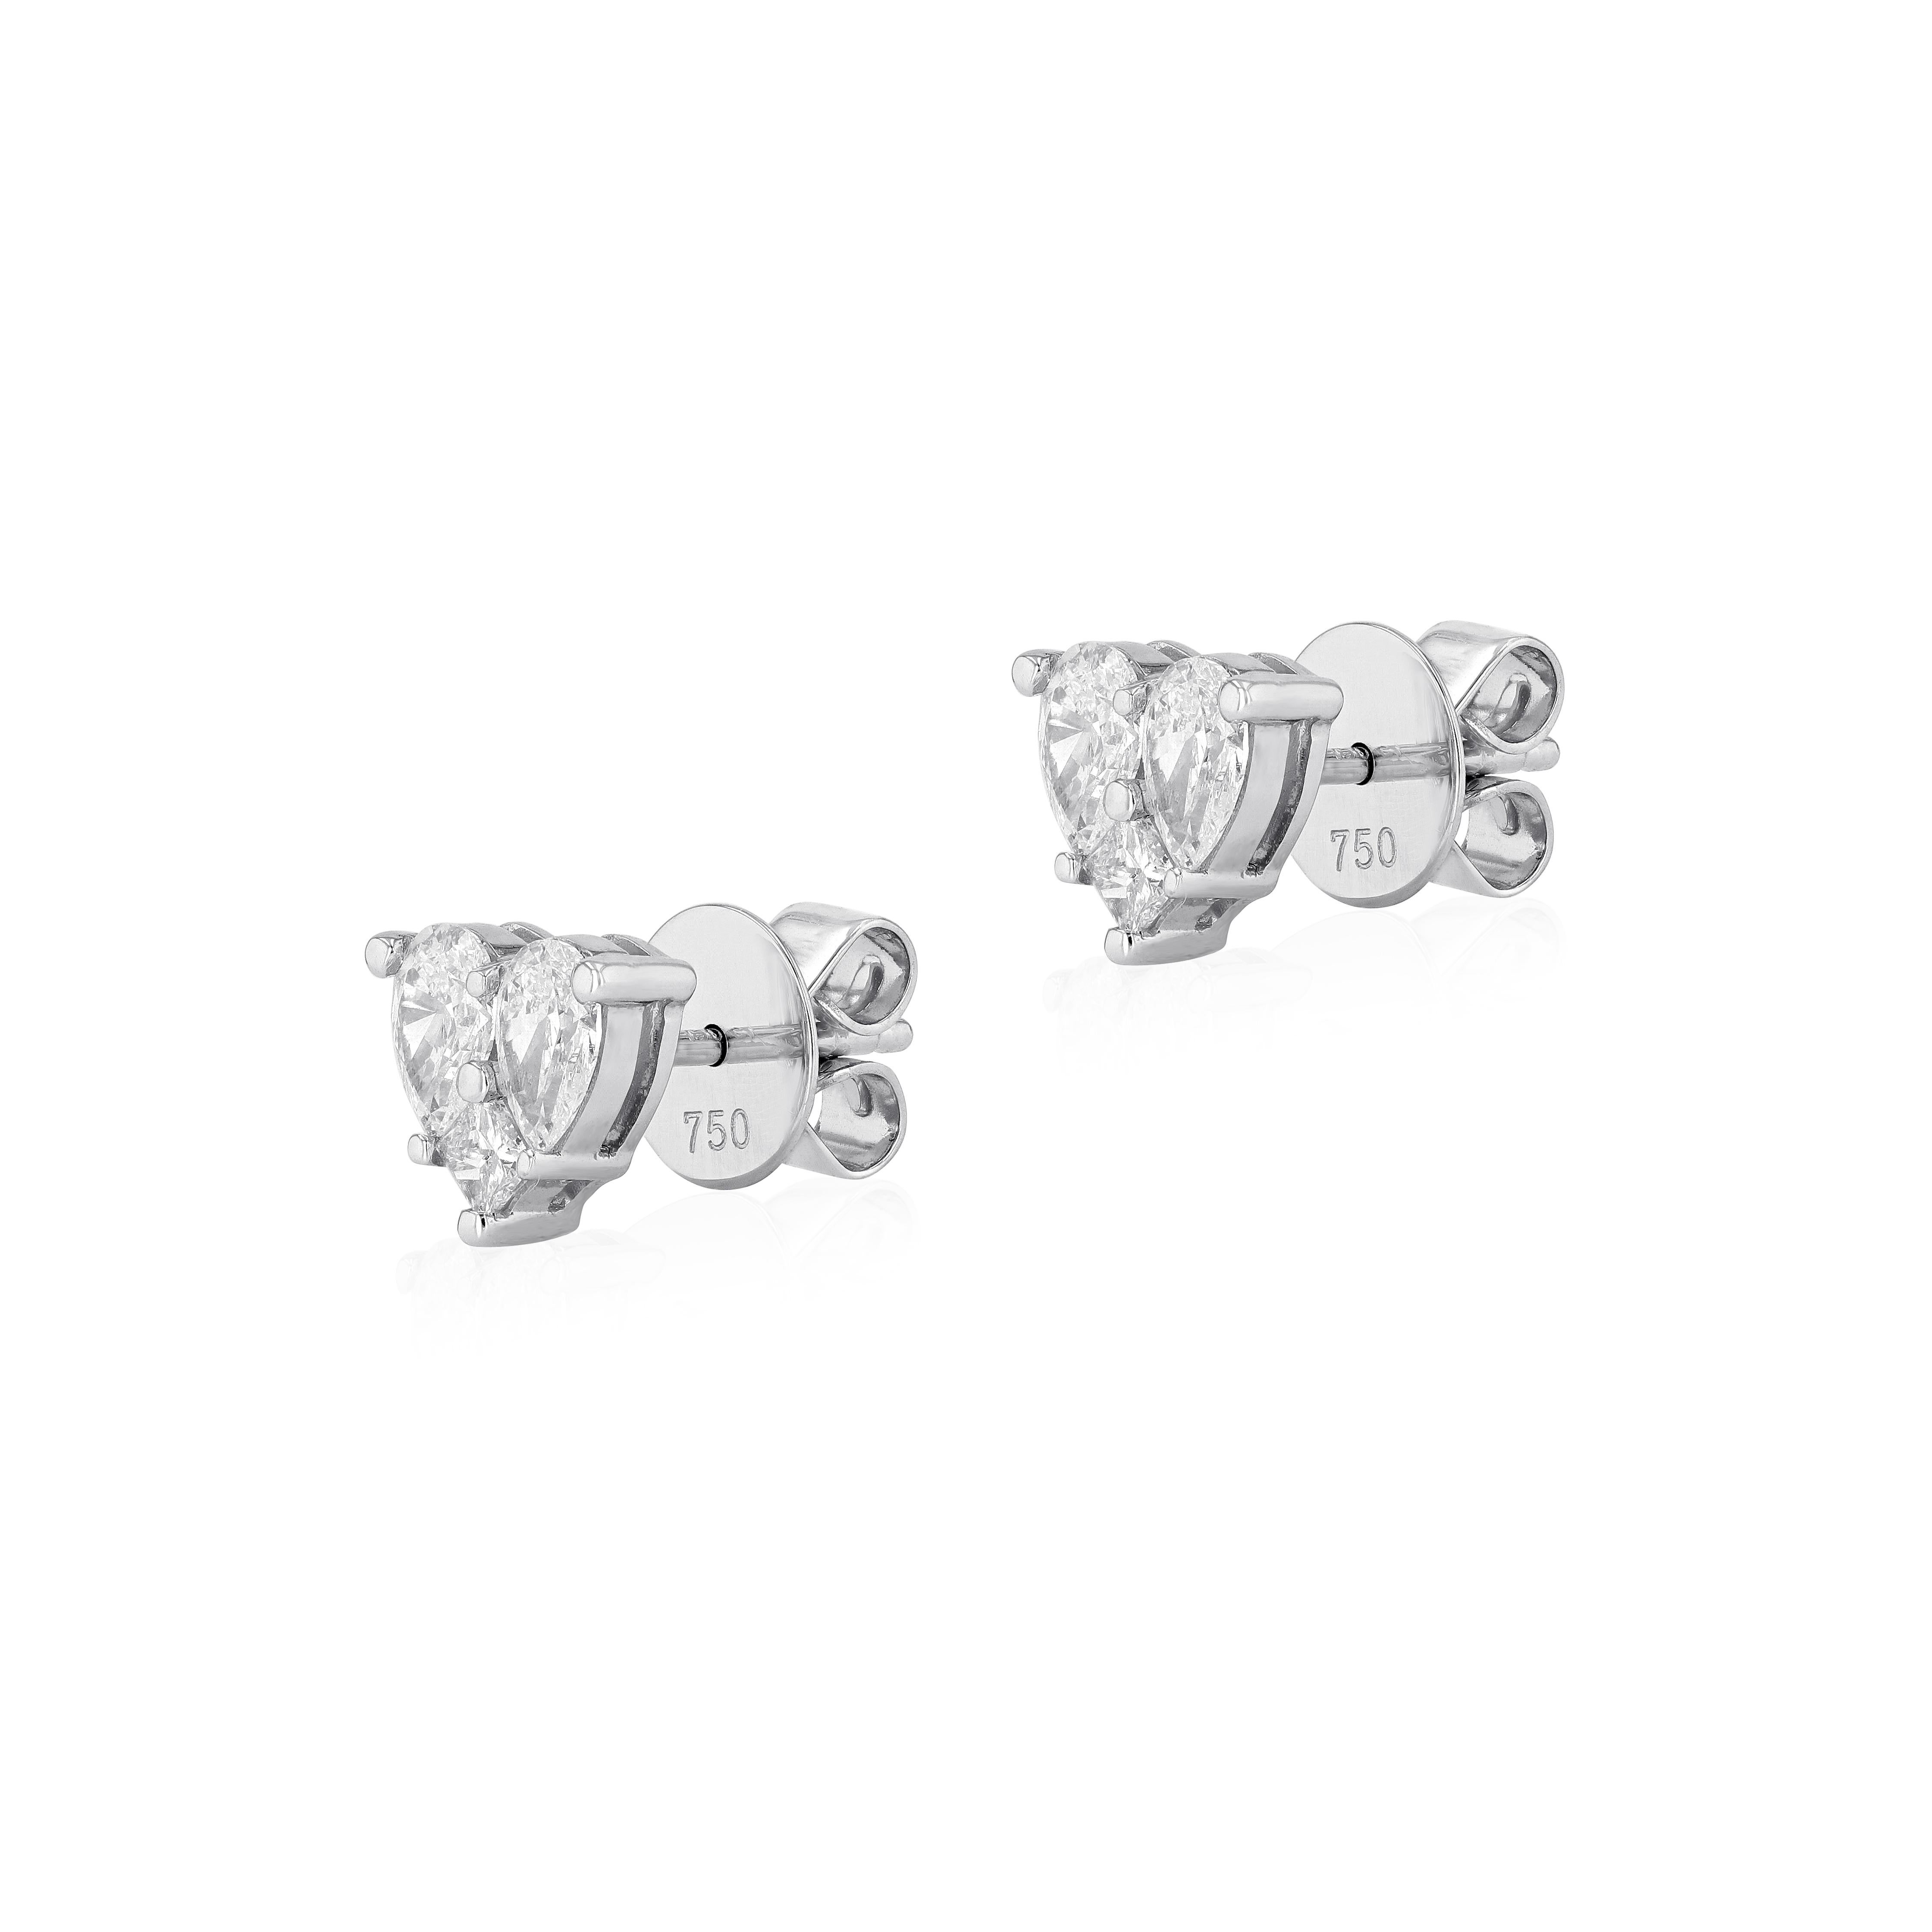 Eternally enchanting, the 18 karat white gold heart shape diamond stud earrings are born from timeless design, featuring the finest quality diamonds, each meticulously cut by our master craftsmen to ensure perfect symmetry and proportion making it a